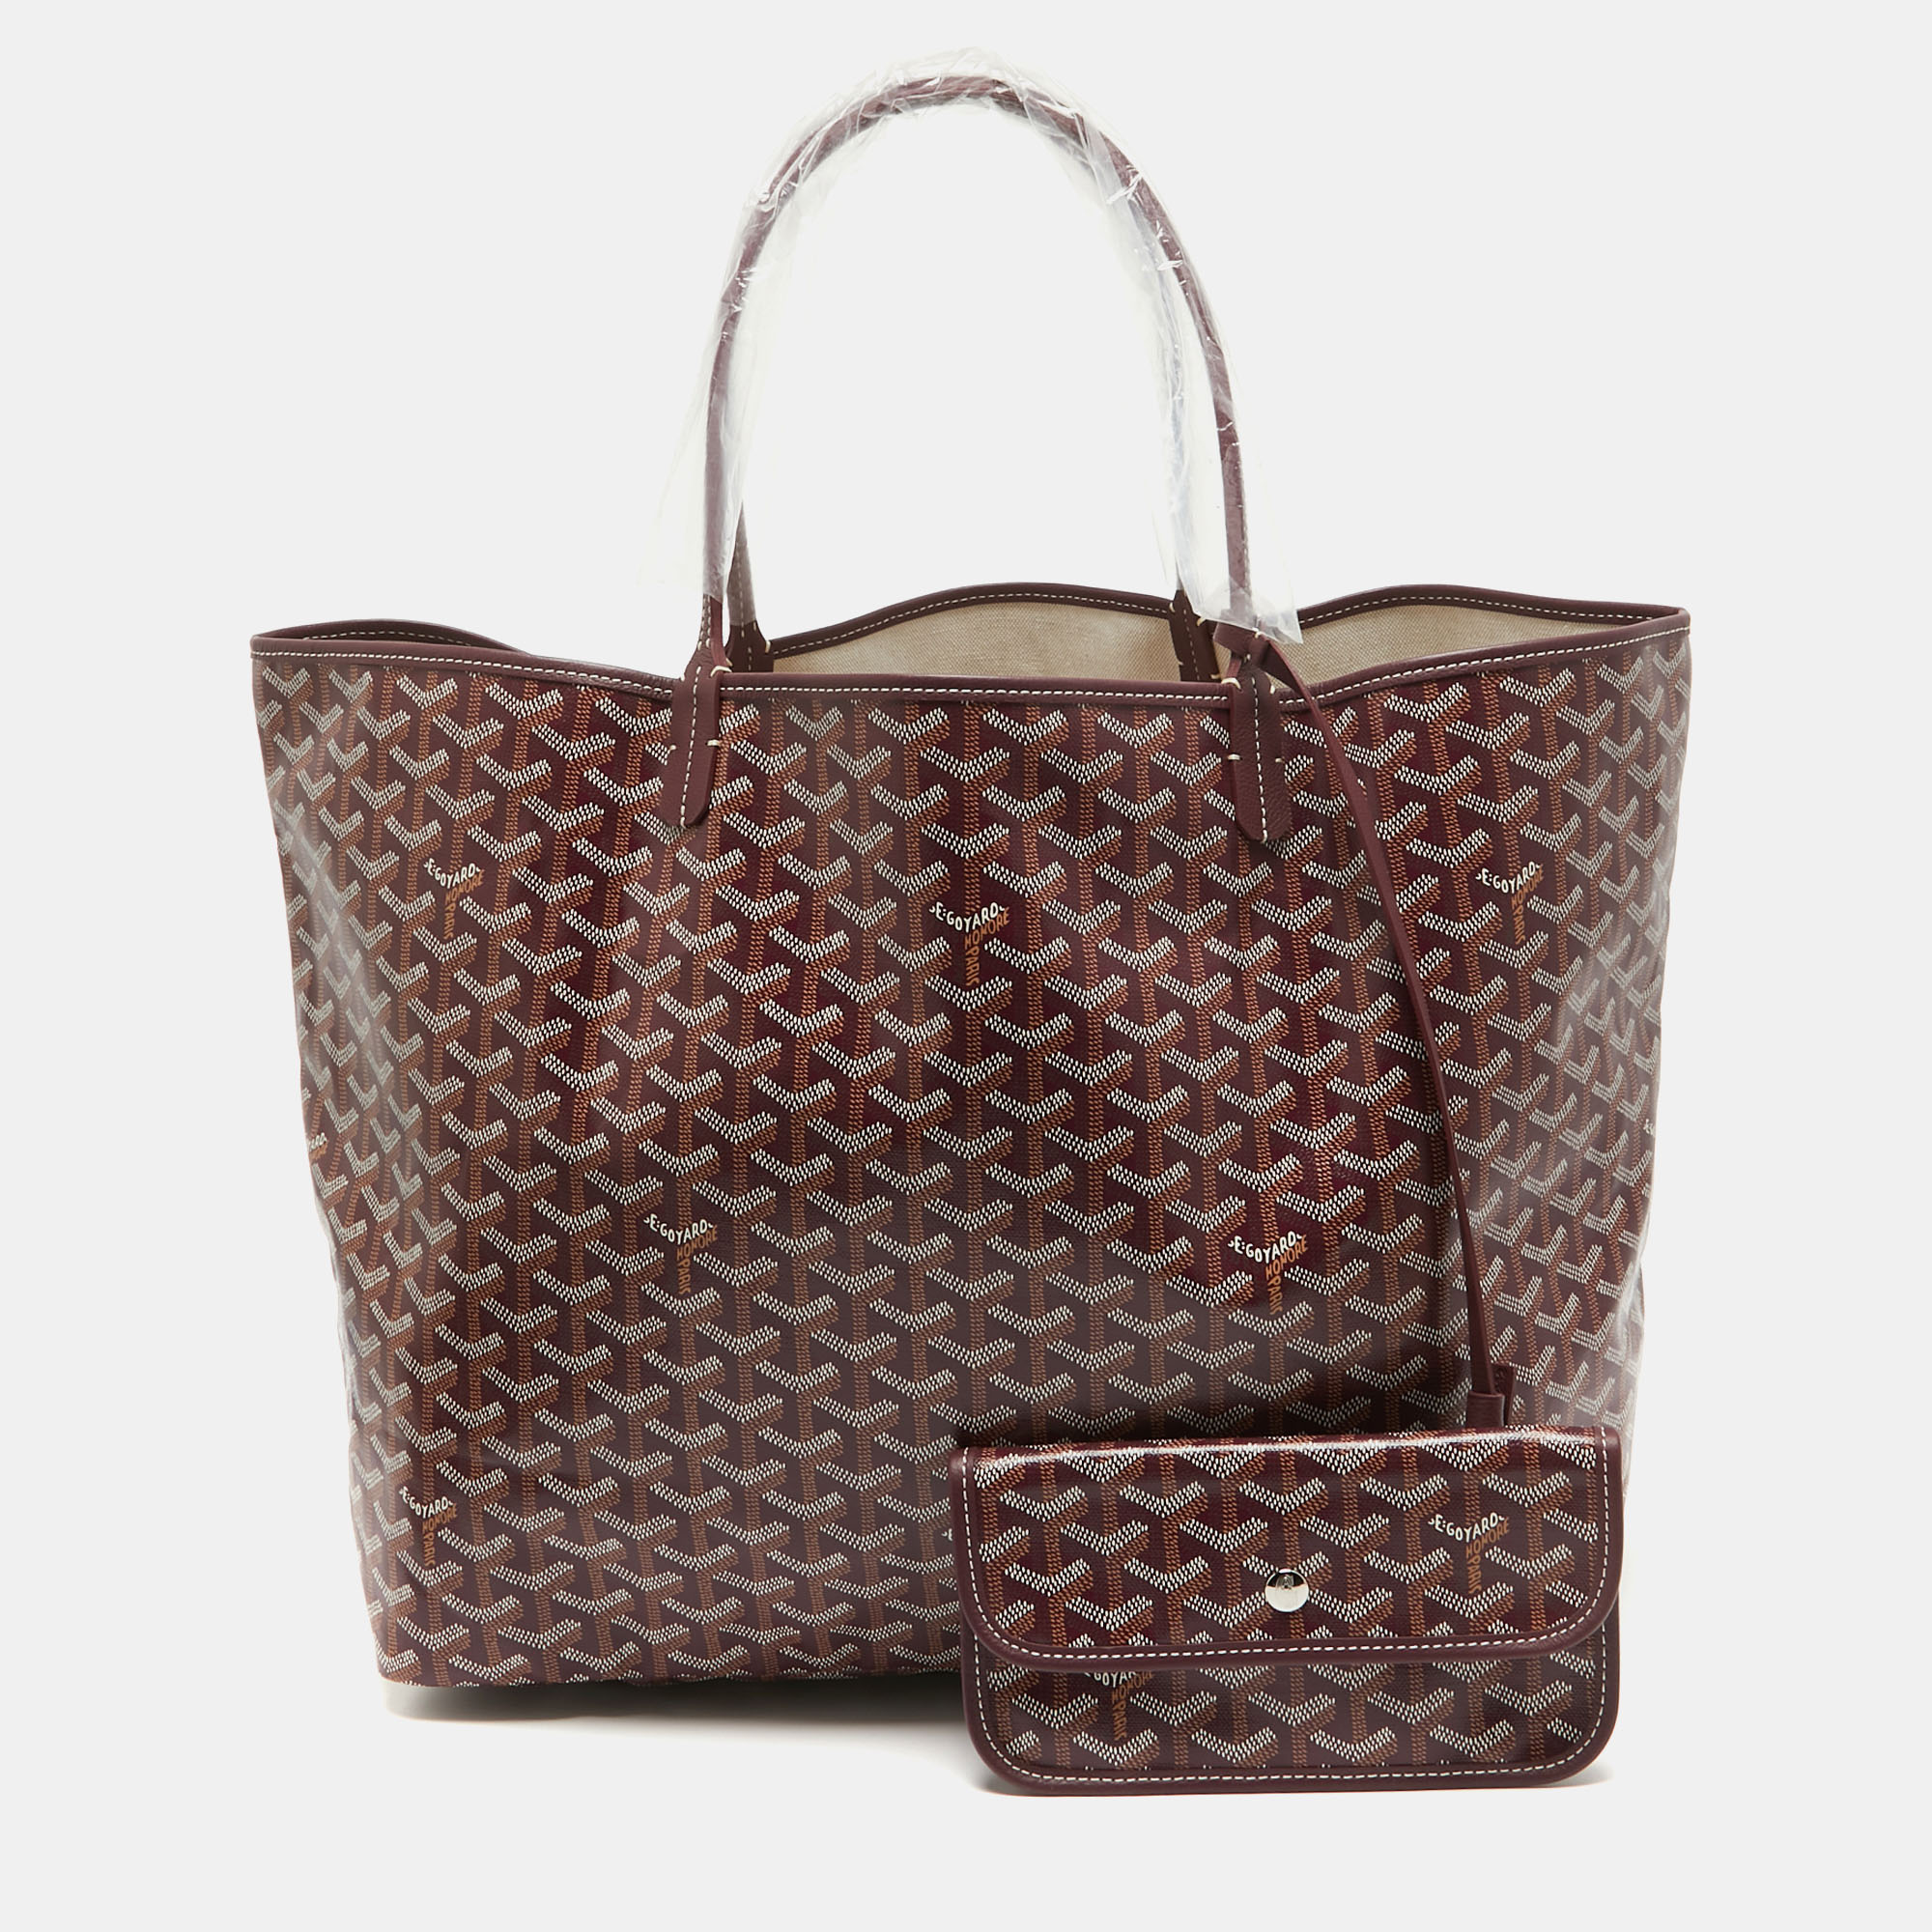 With the signature Goyardine print all over the St Louis GM tote from Goyard is crafted with canvas and features dual sleek handles. A timeless addition to your collection this bag is a must have